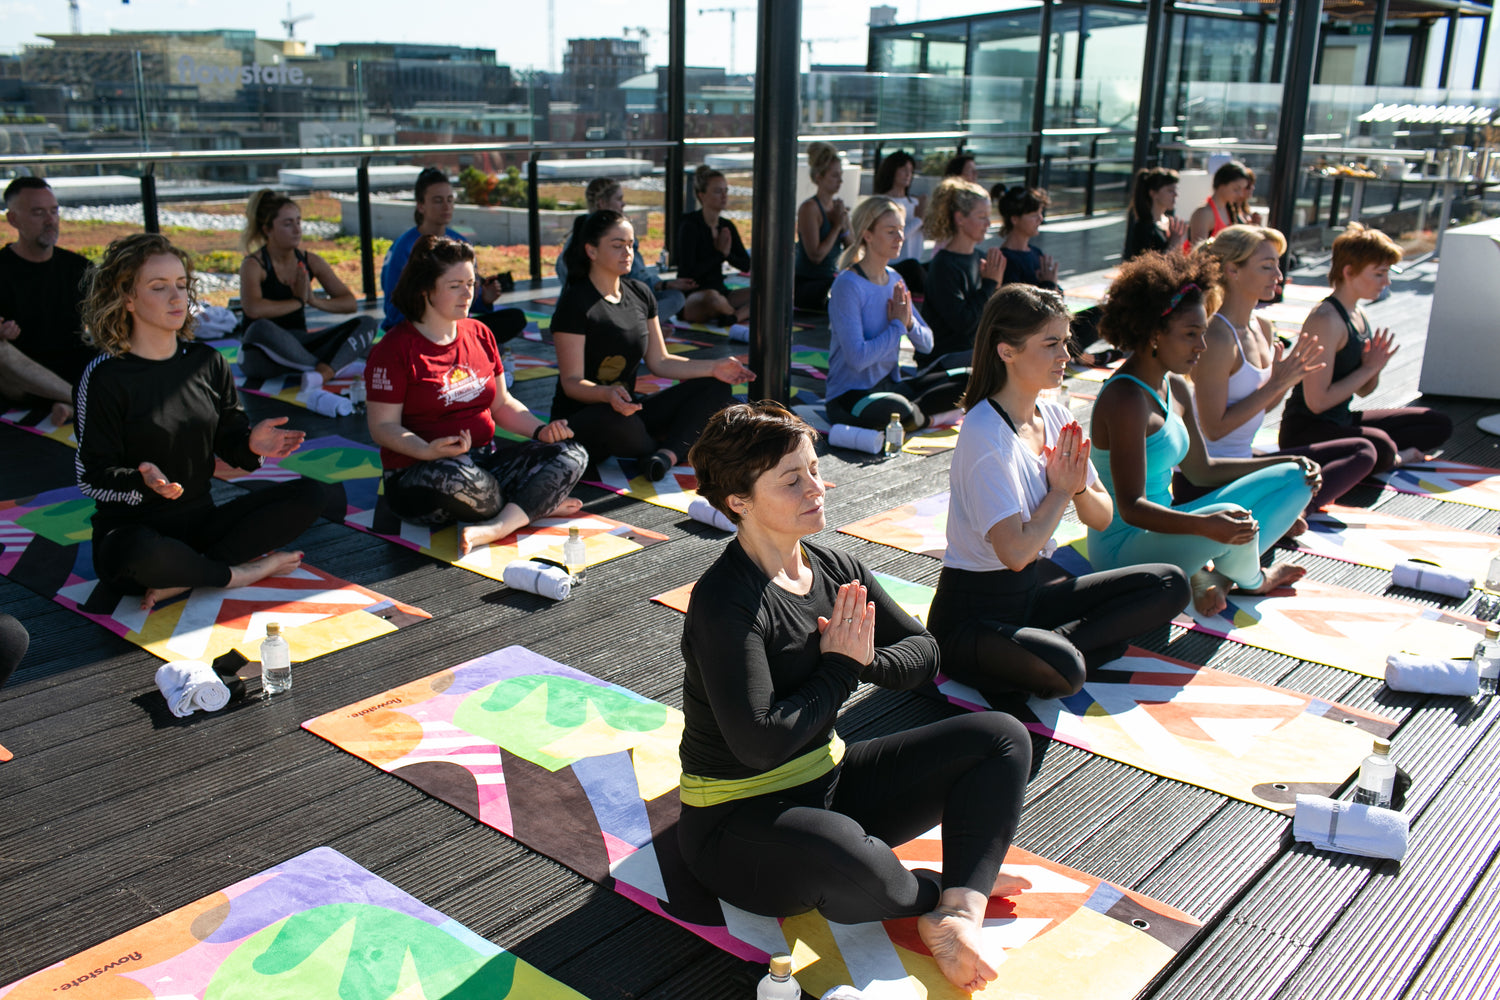 A large group of people practicing yoga on Flowstate yoga mats in the sun